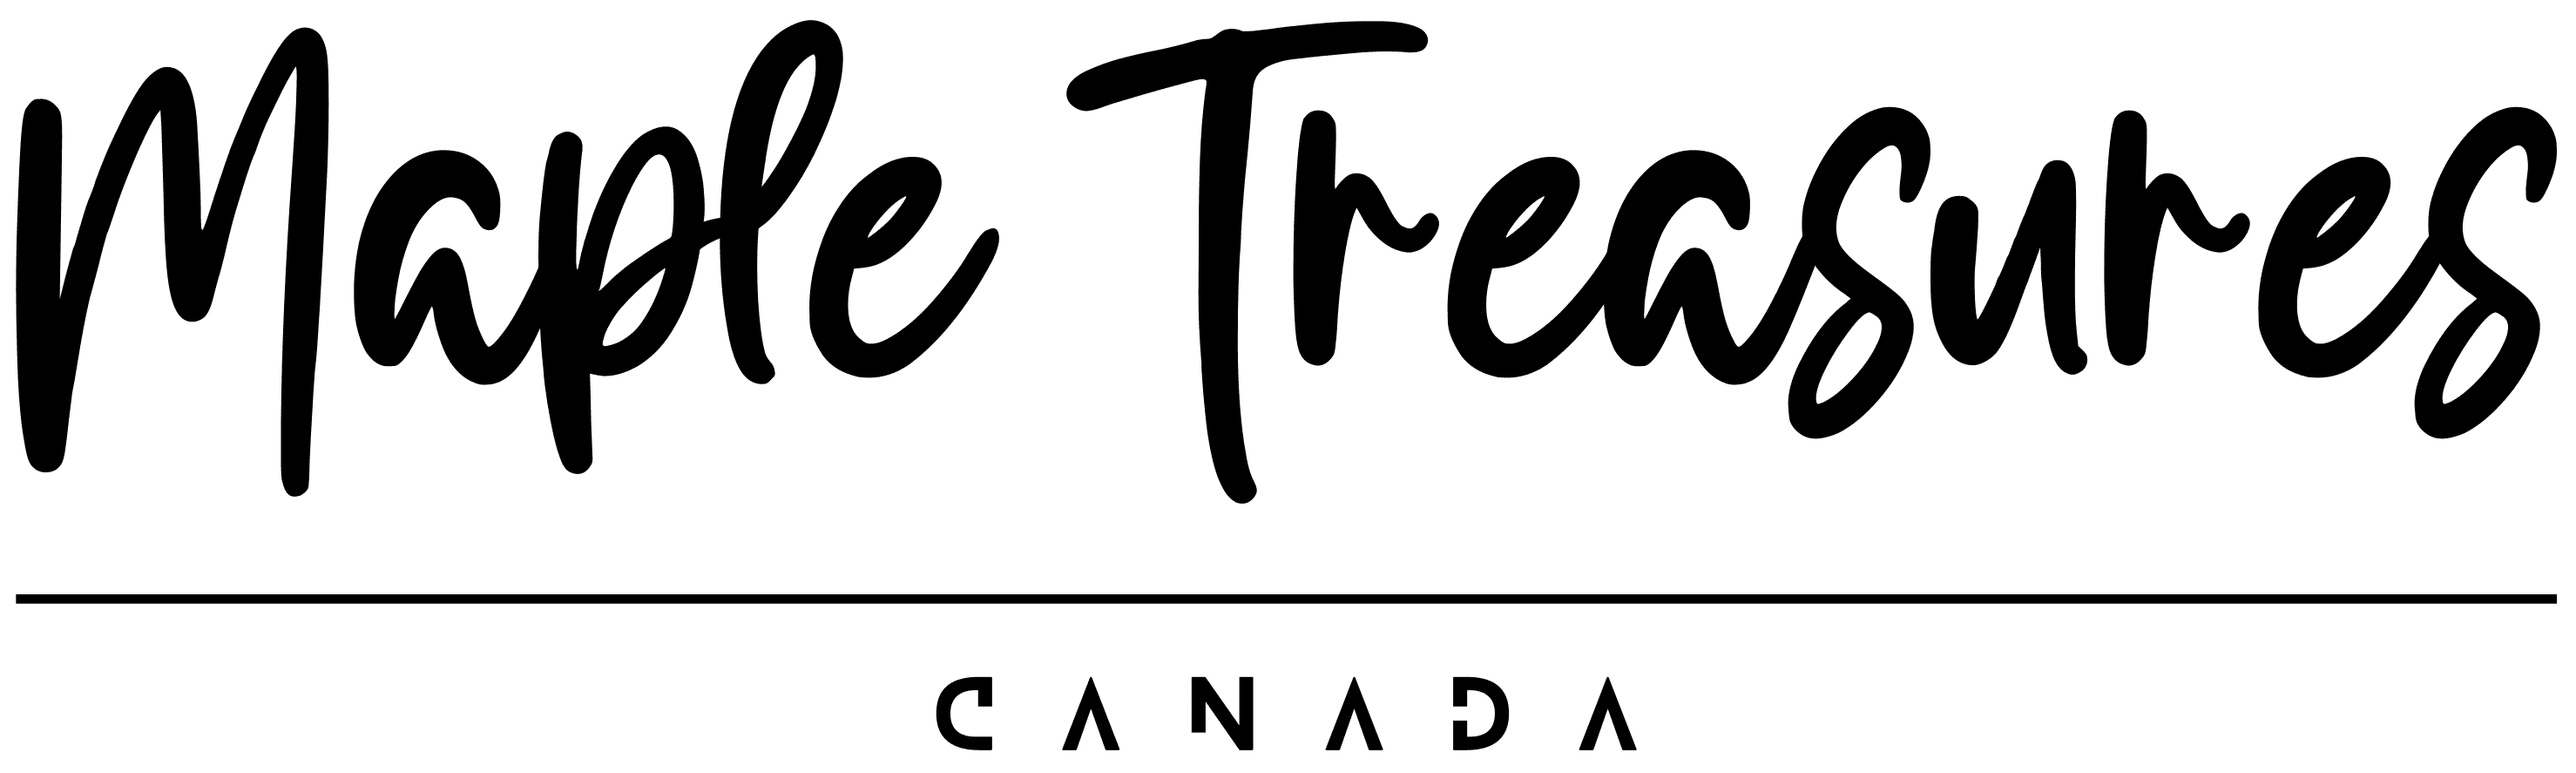 Maple treasures, Canadian grocery store